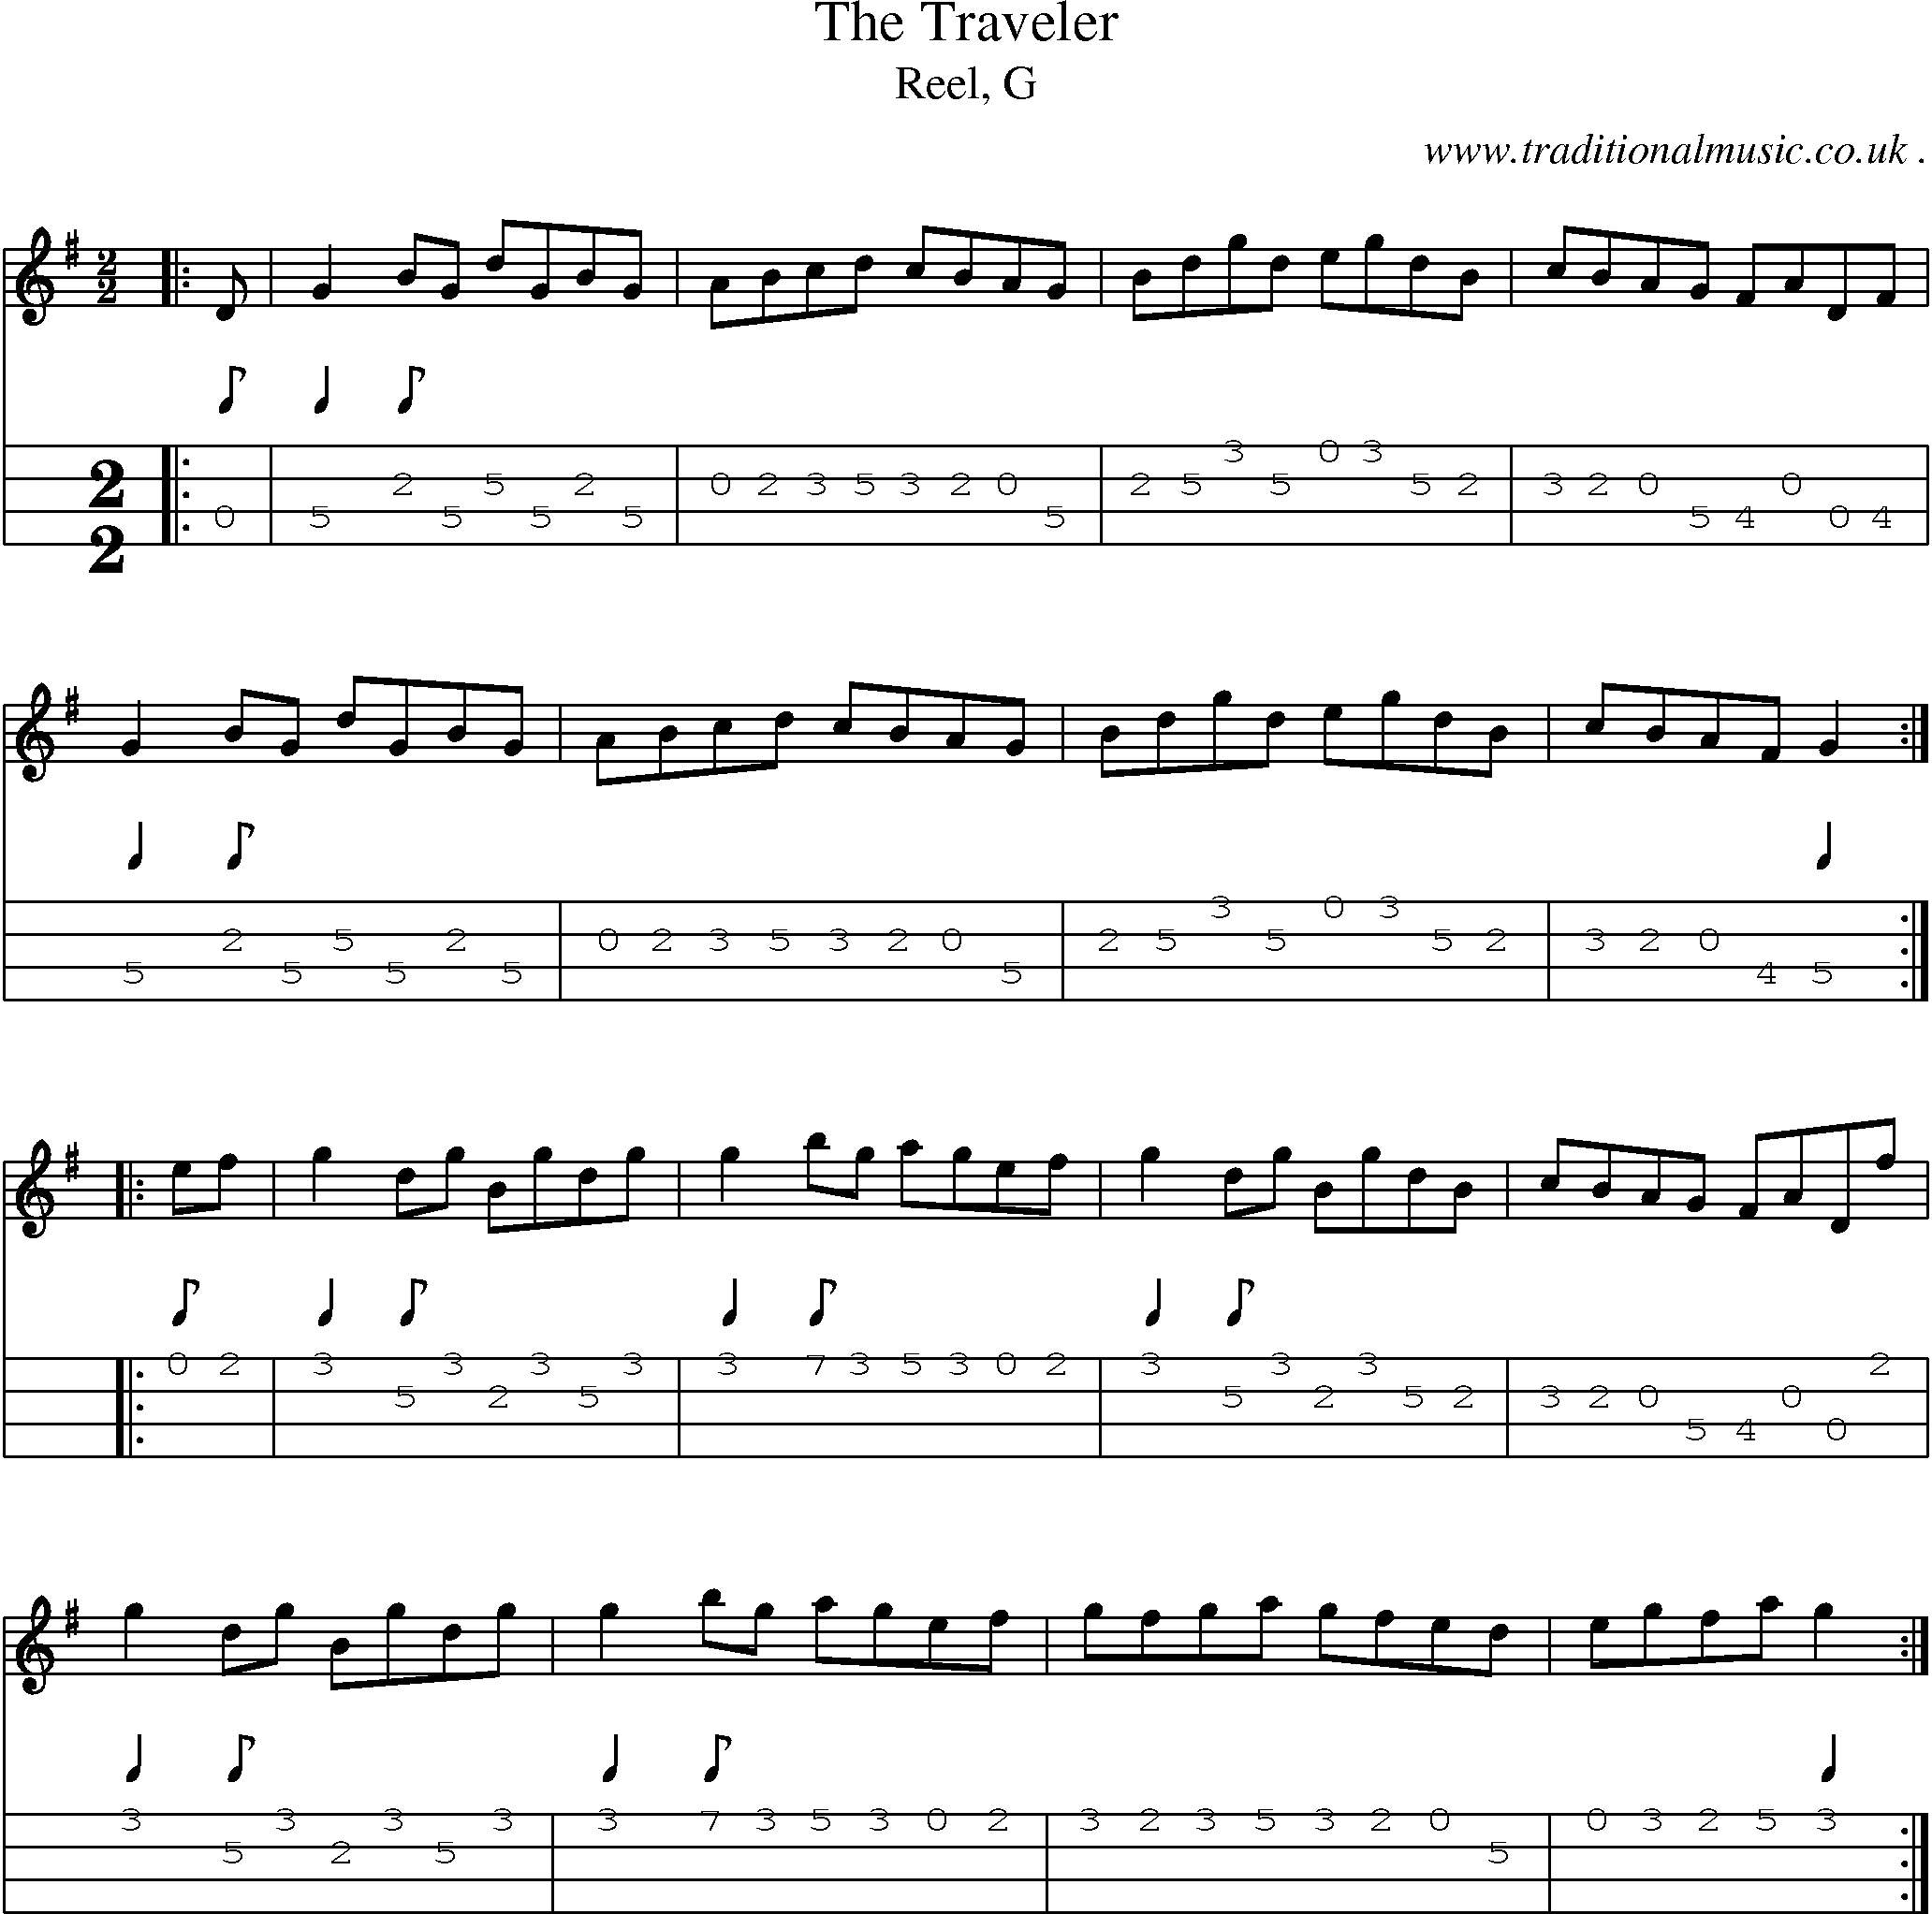 Sheet-music  score, Chords and Mandolin Tabs for The Traveler